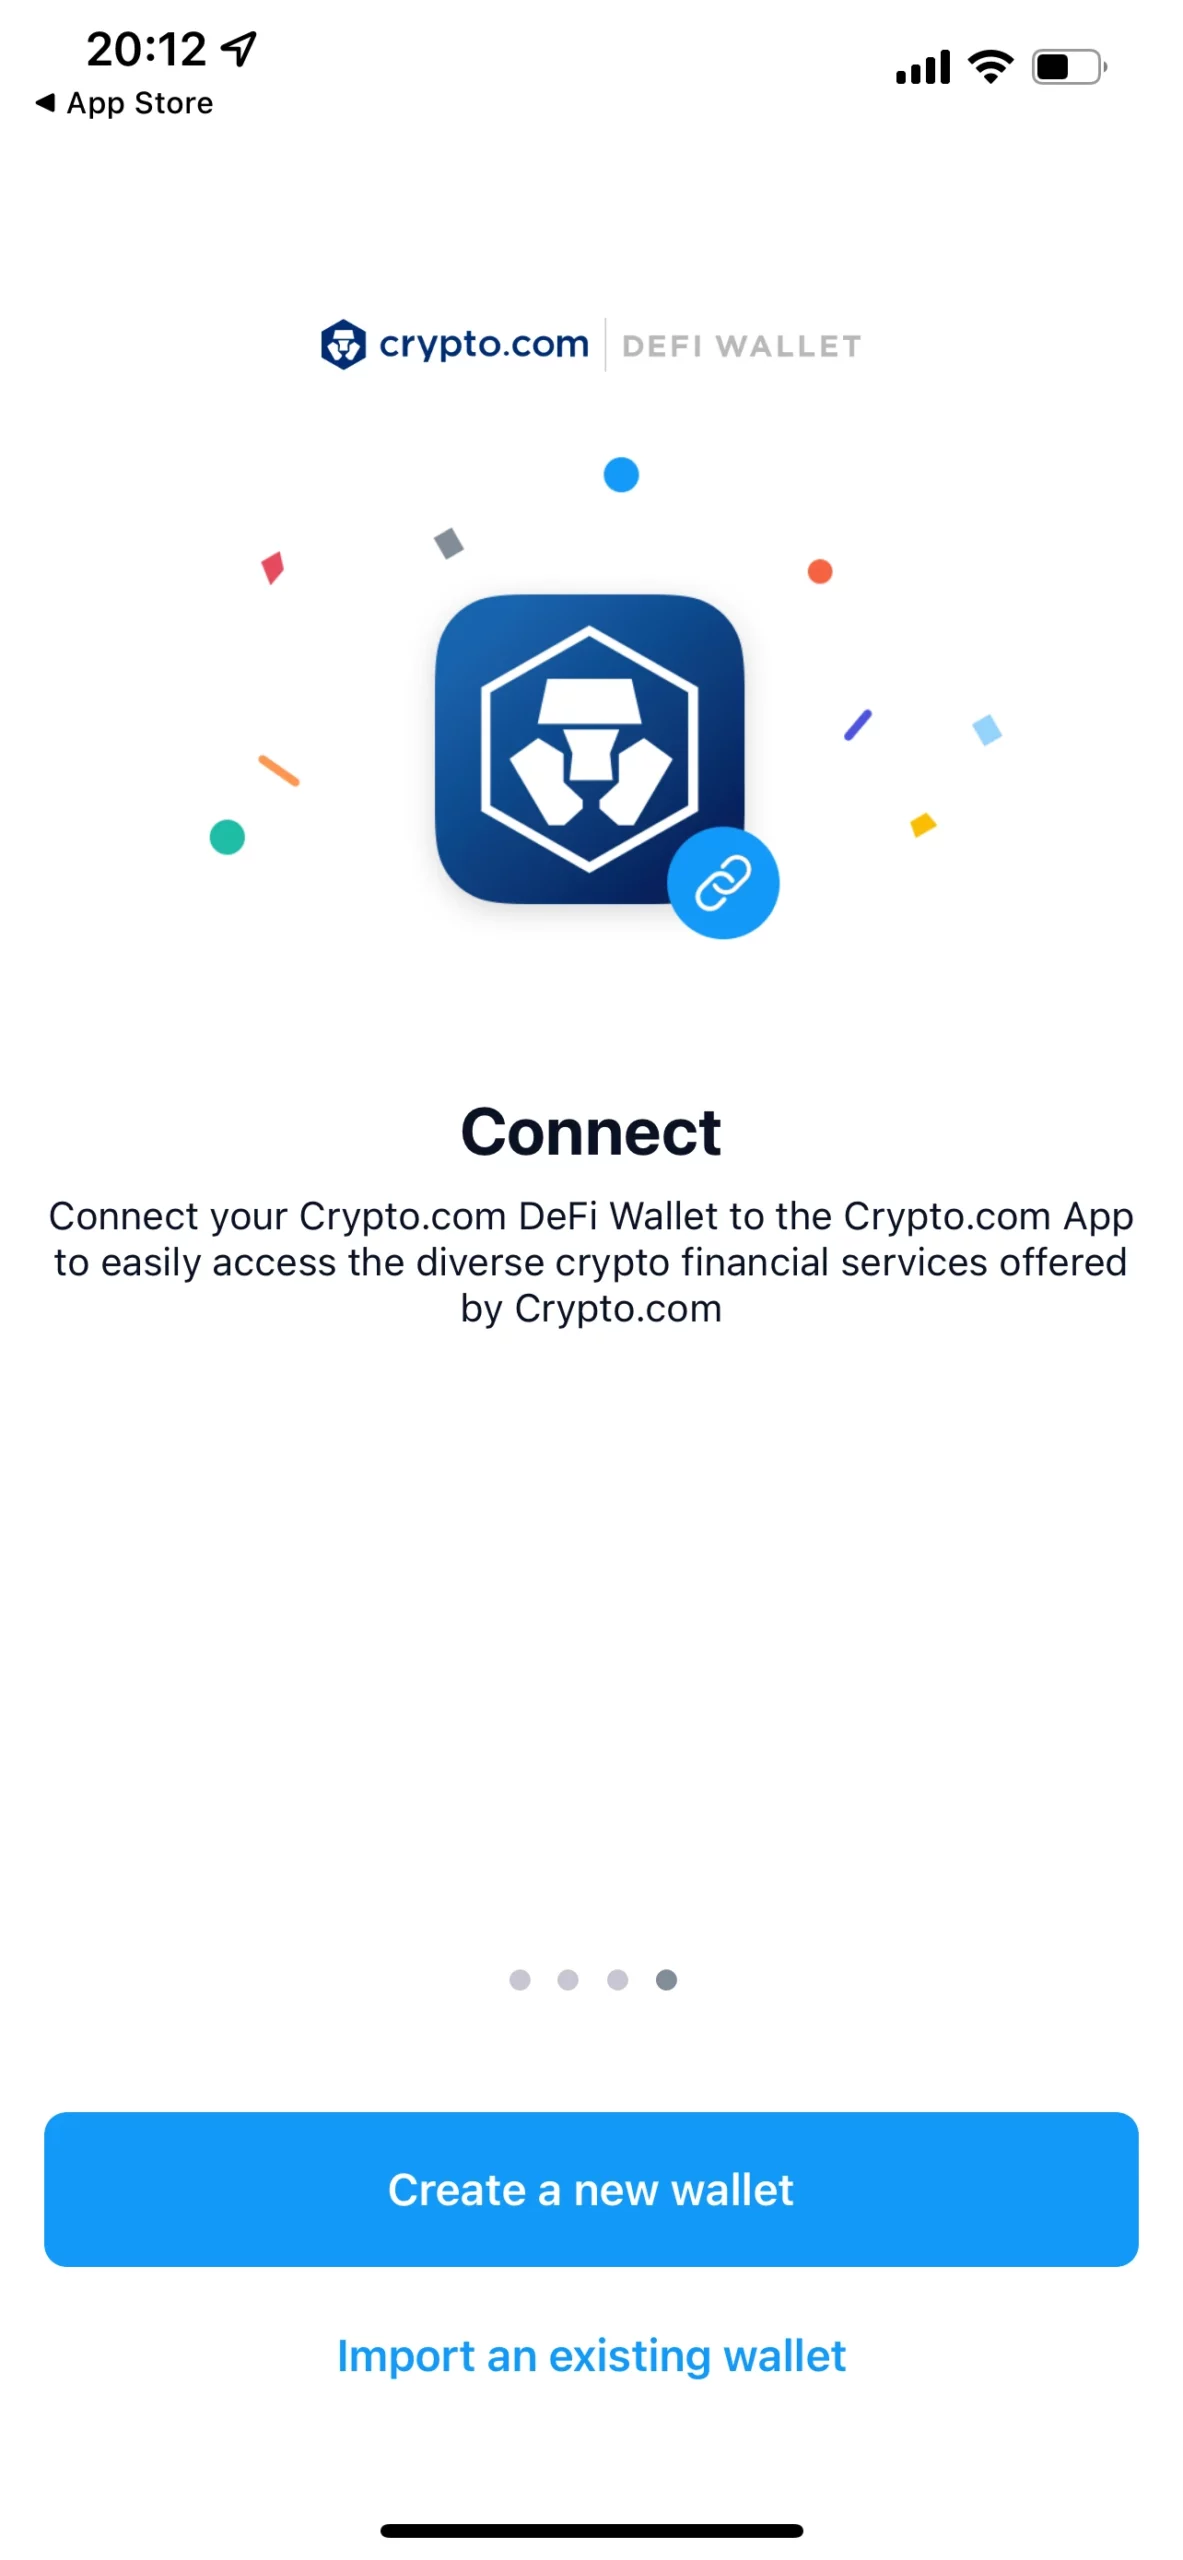 Create an account and connect to crypto.com